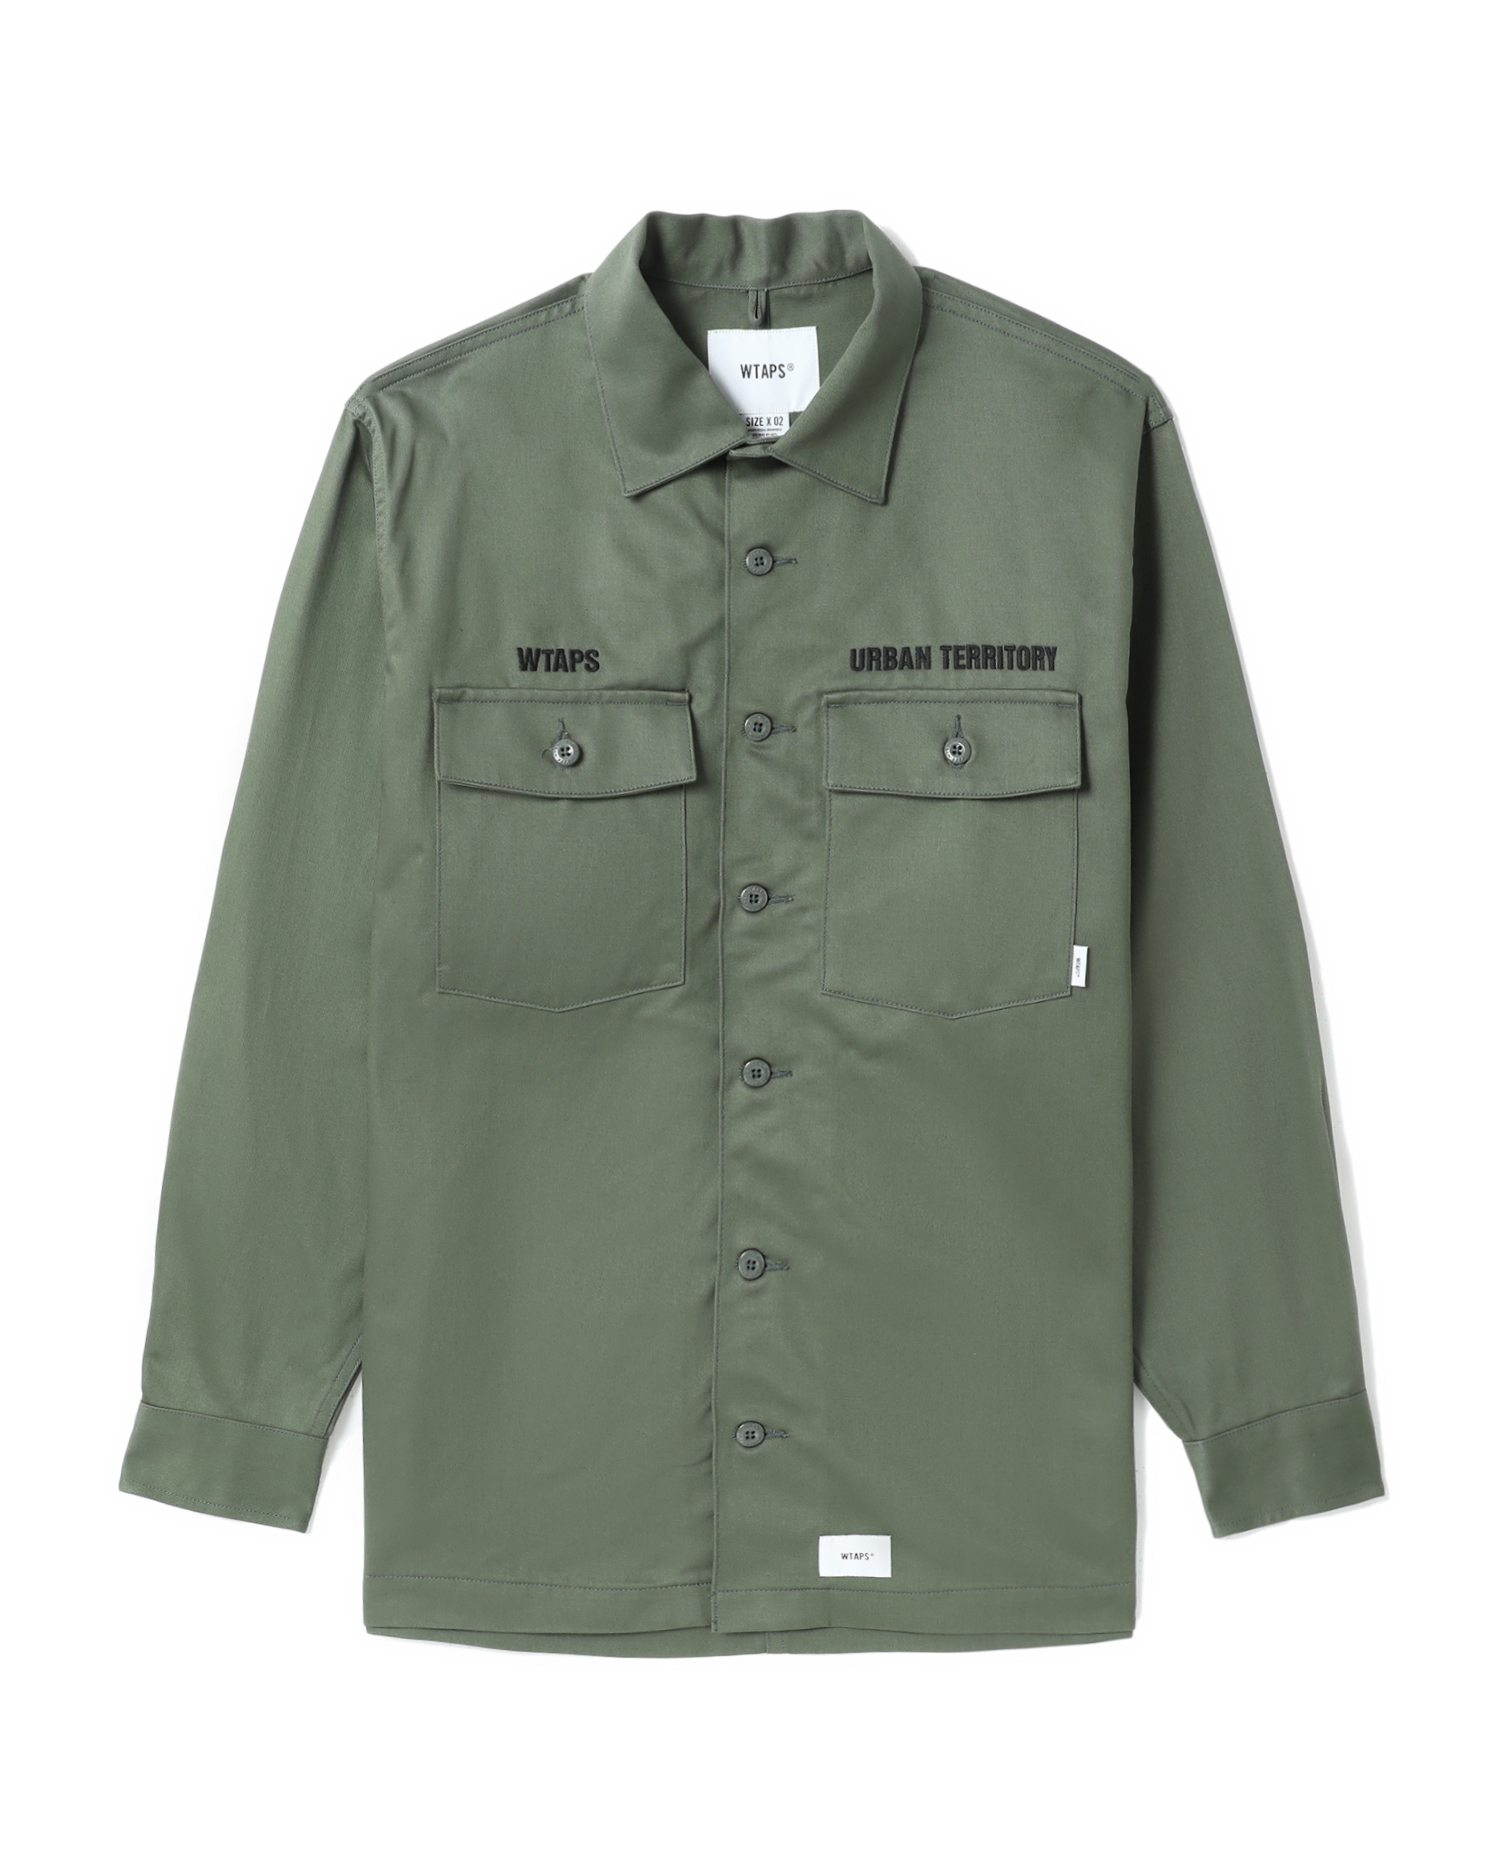 WTAPS BUDS / SS / COTTON. TWILL ncck.org